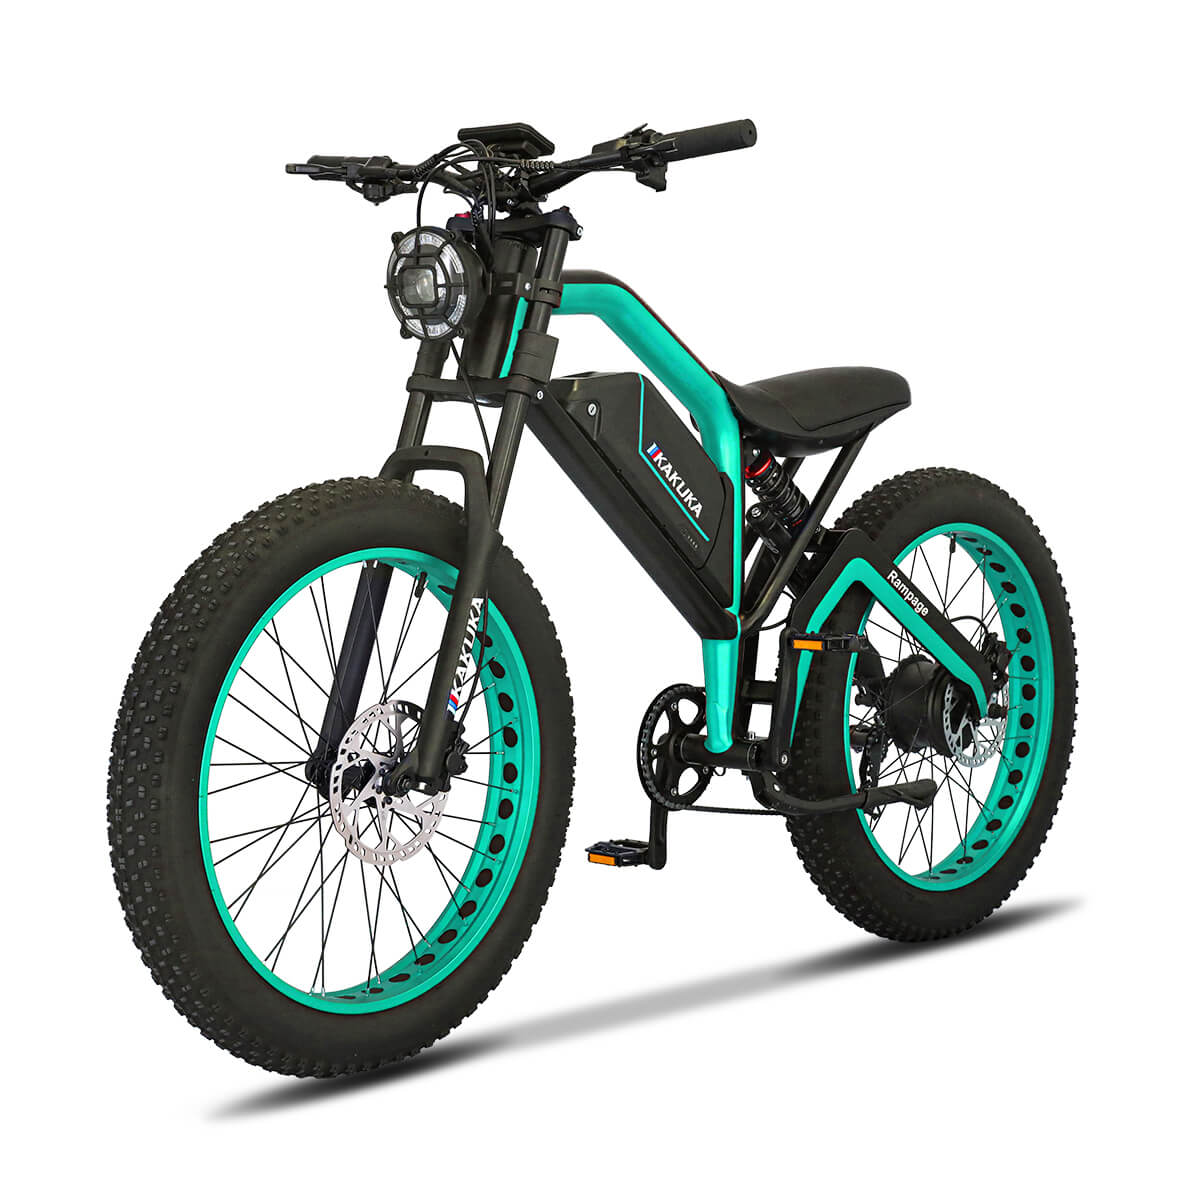 Kakuka Rampage Pro Fat Tire Ebike with 1000W bafang motor and 4inch color LCD display